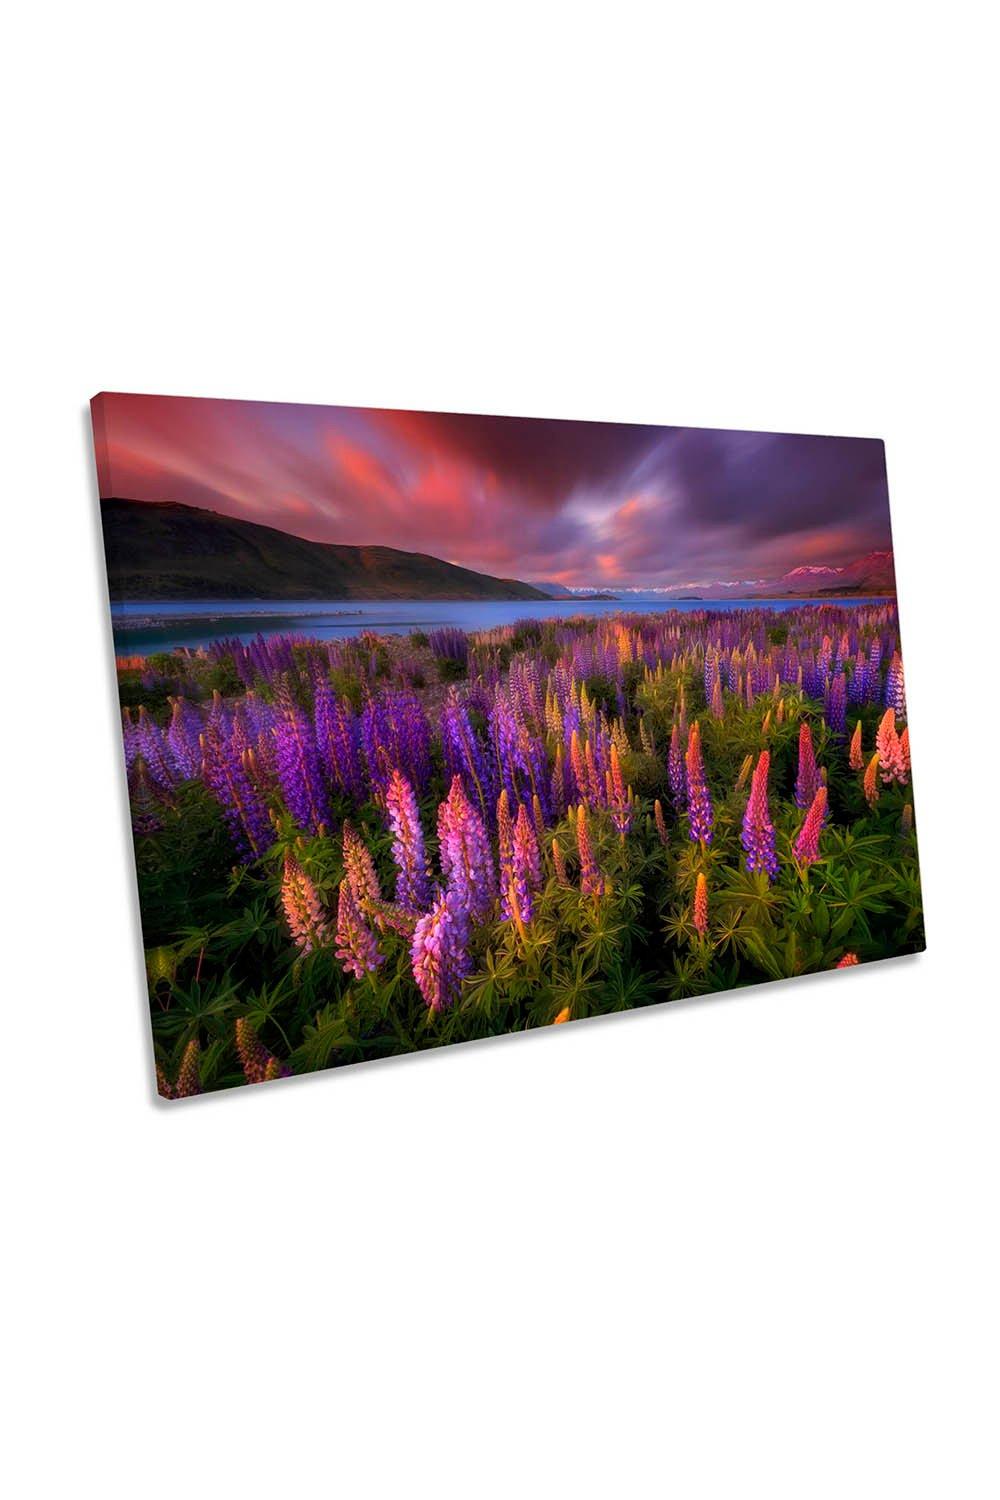 Springtime Rush Lupines Flowers New Zealand Canvas Wall Art Picture Print